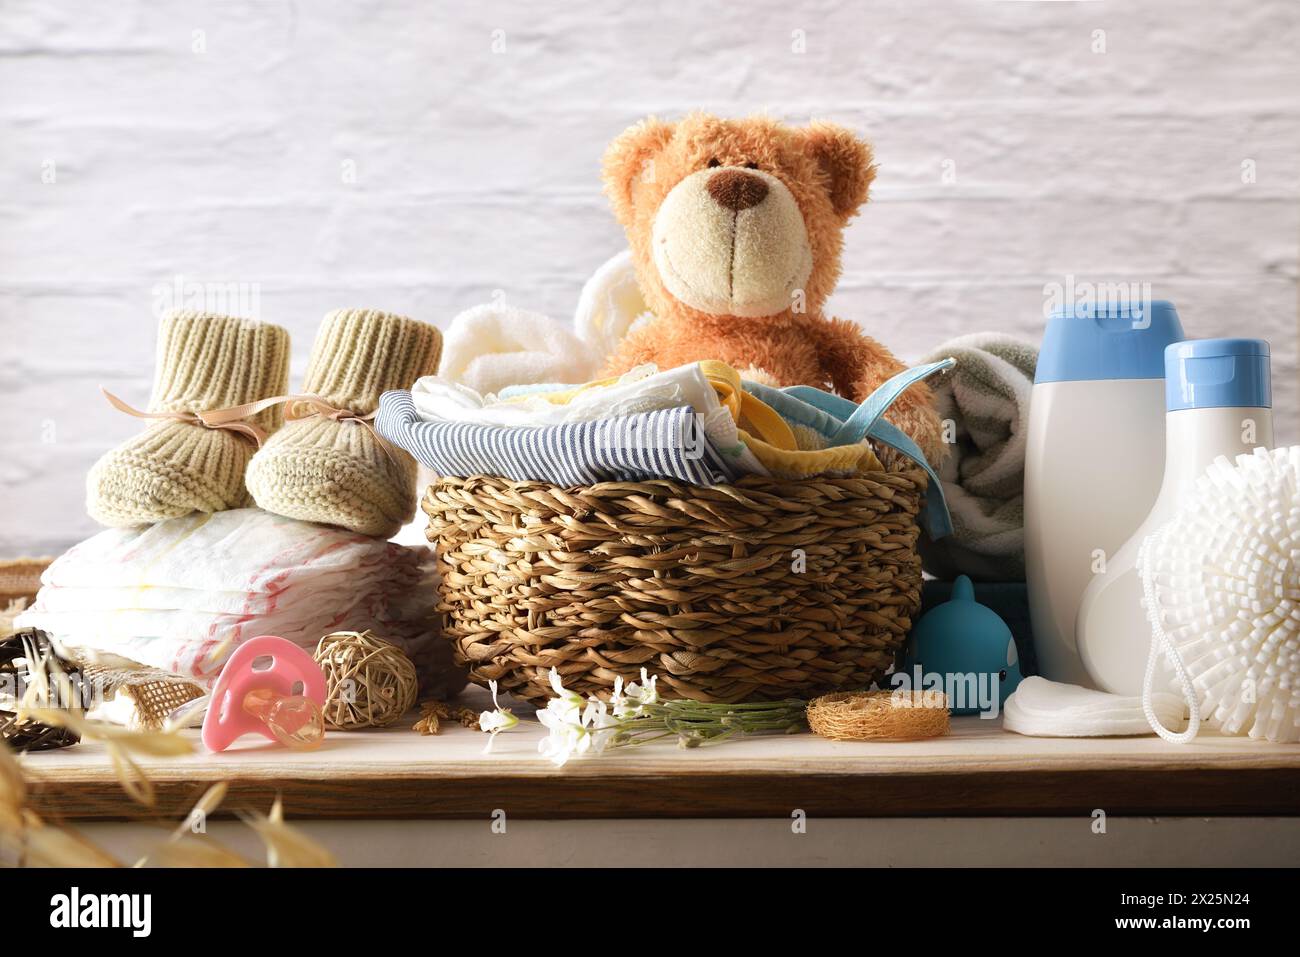 Clothes and accessories for clothing and baby grooming on wooden chest of drawers in room with white brick wall. Front view. Stock Photo